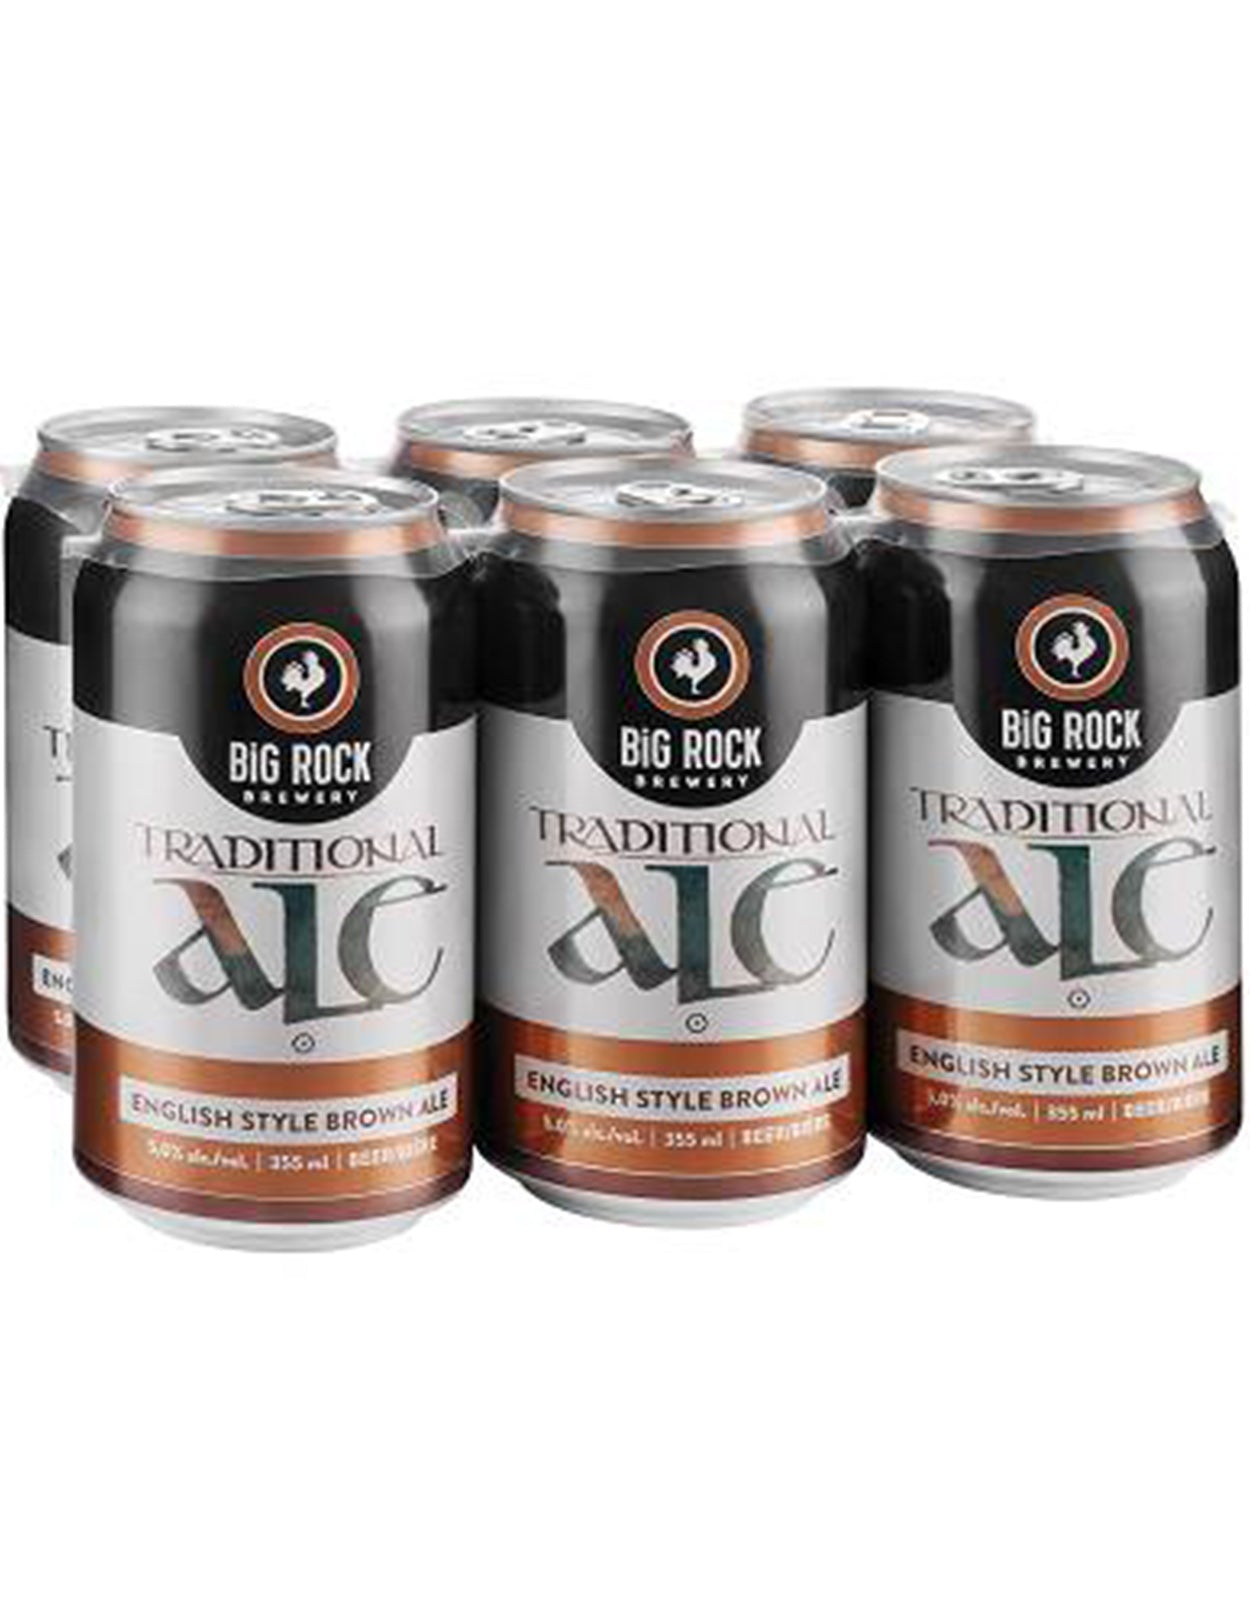 Big Rock Traditional 355 ml - 6 Cans